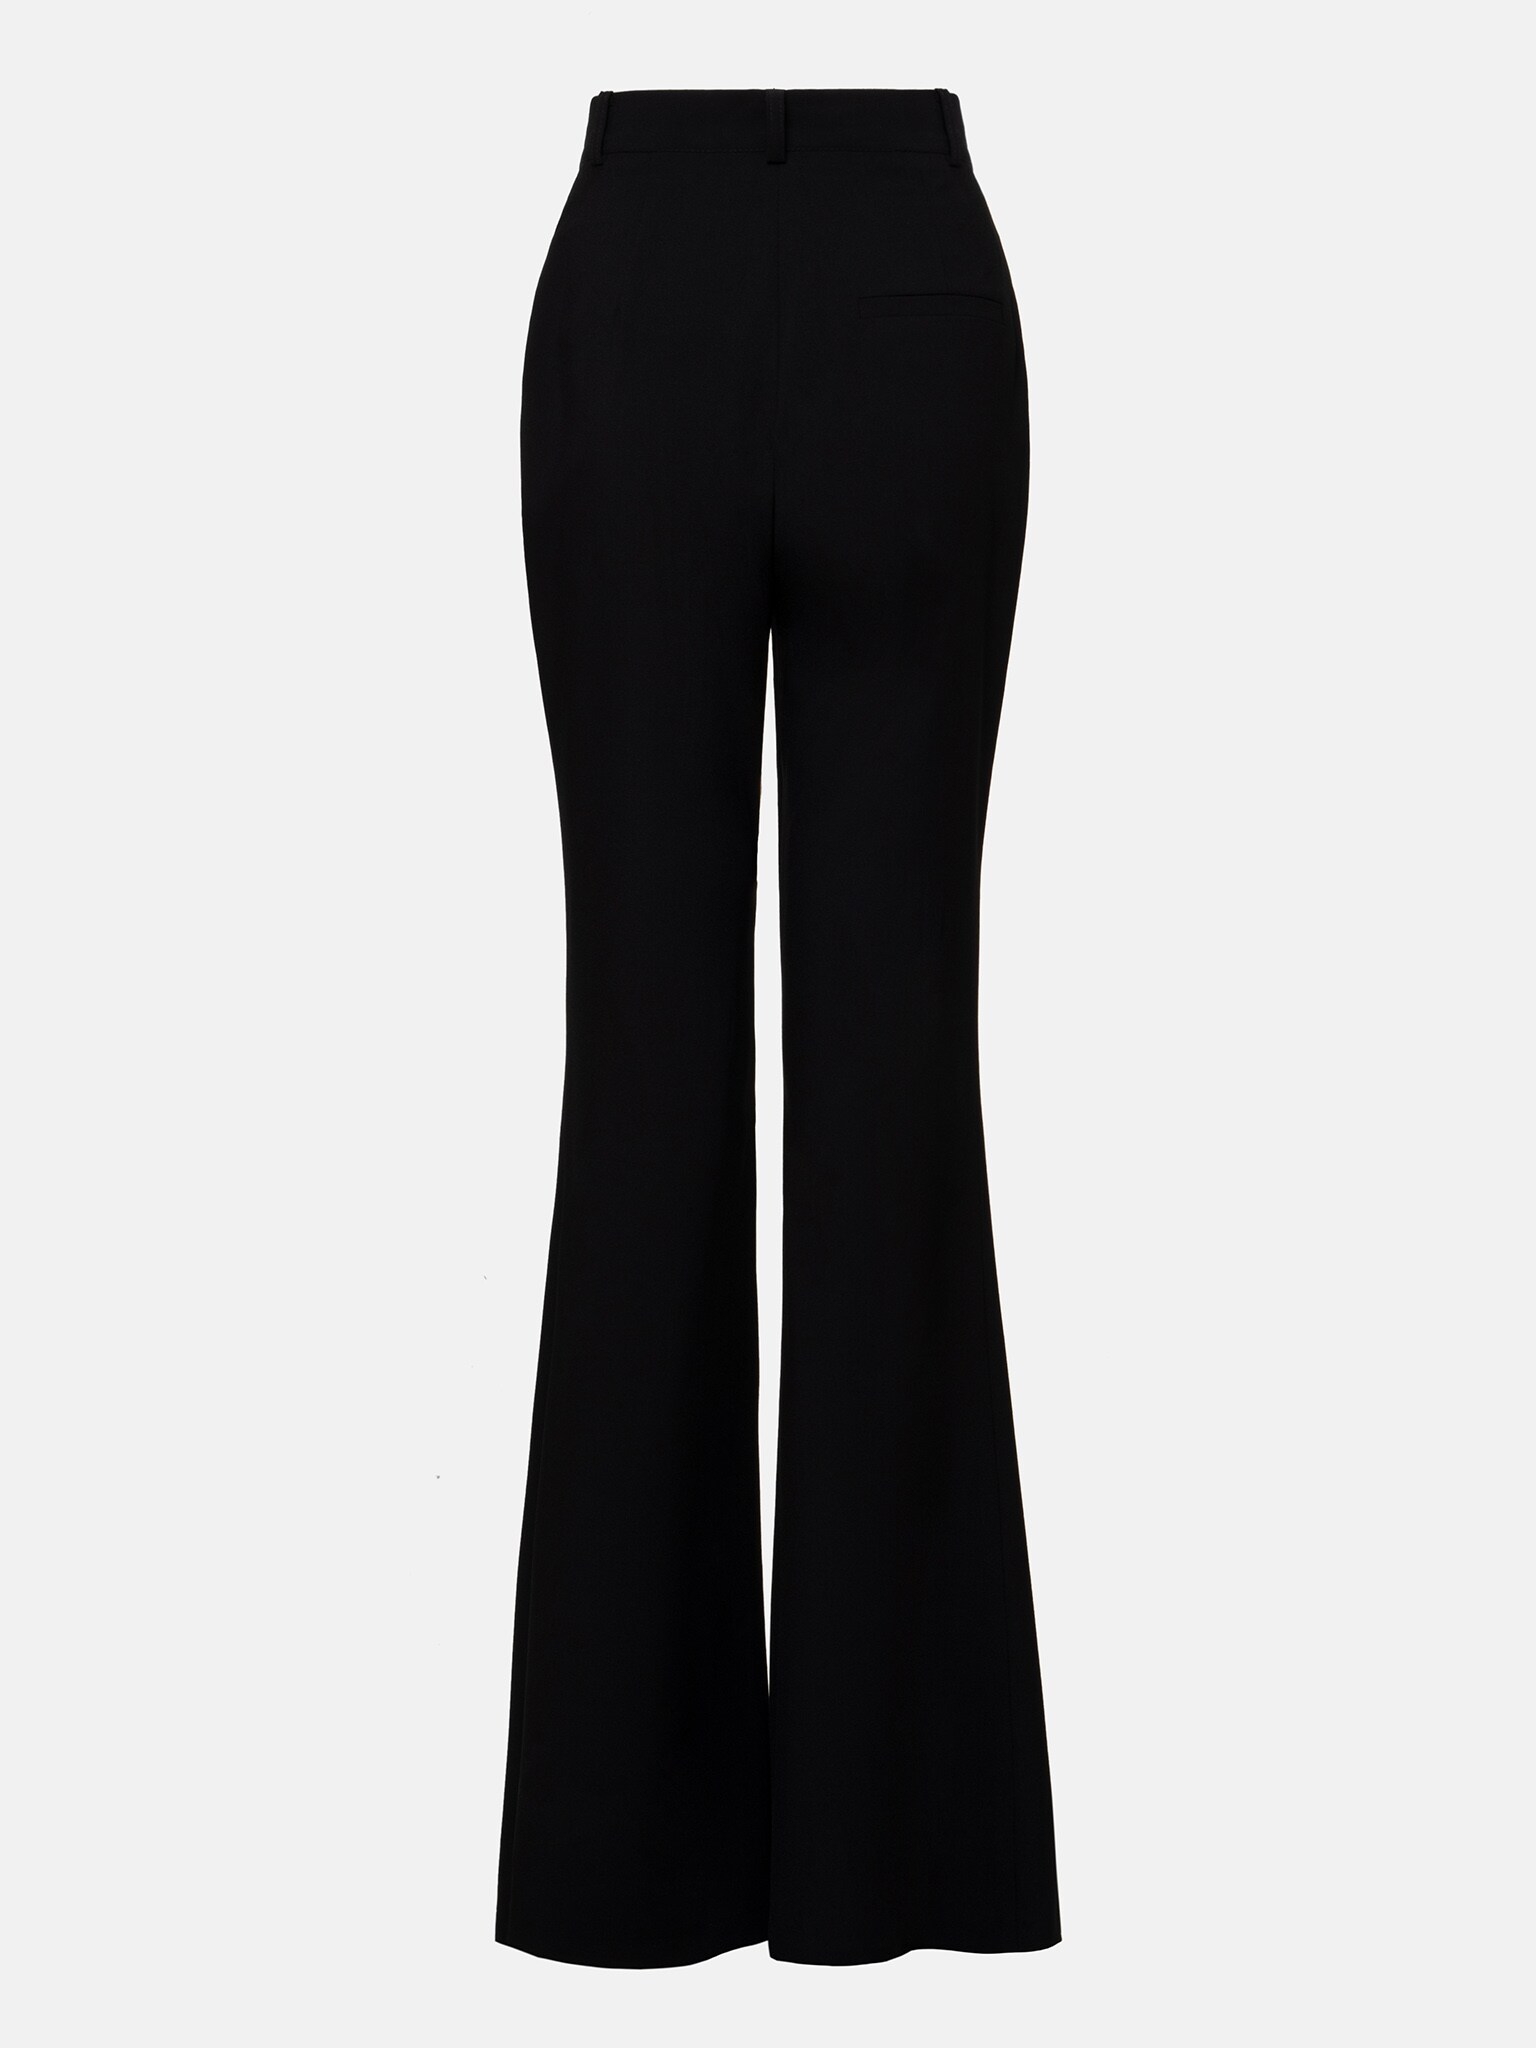 LICHI - Online fashion store :: Flared high-rise pants